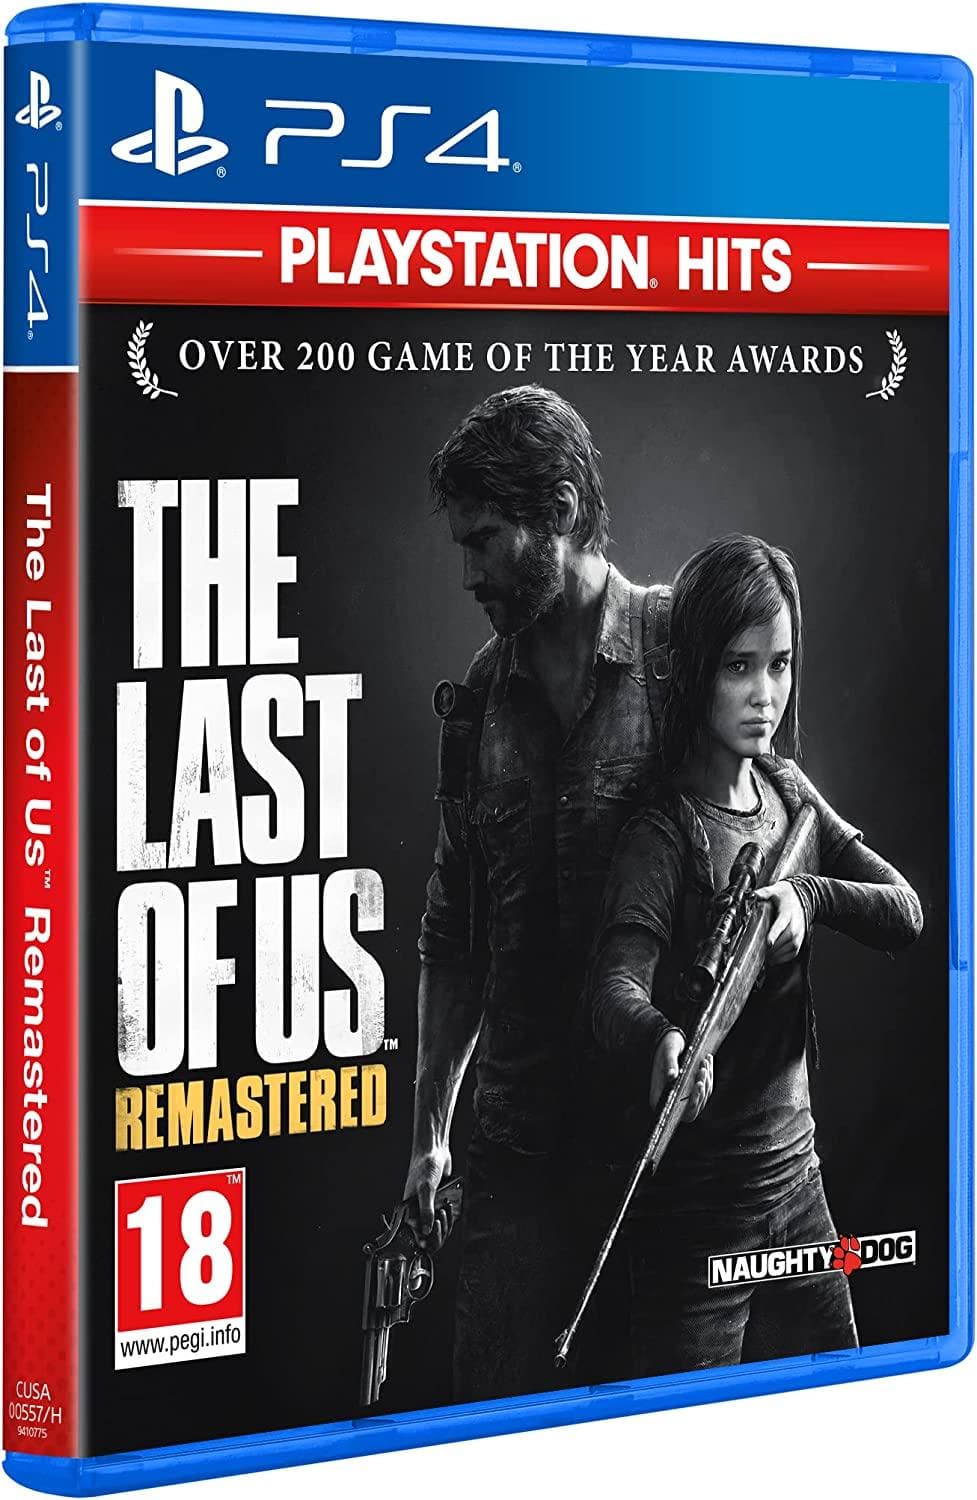 The Last Remastered - PlayStation Hits for PS4 DLC) |